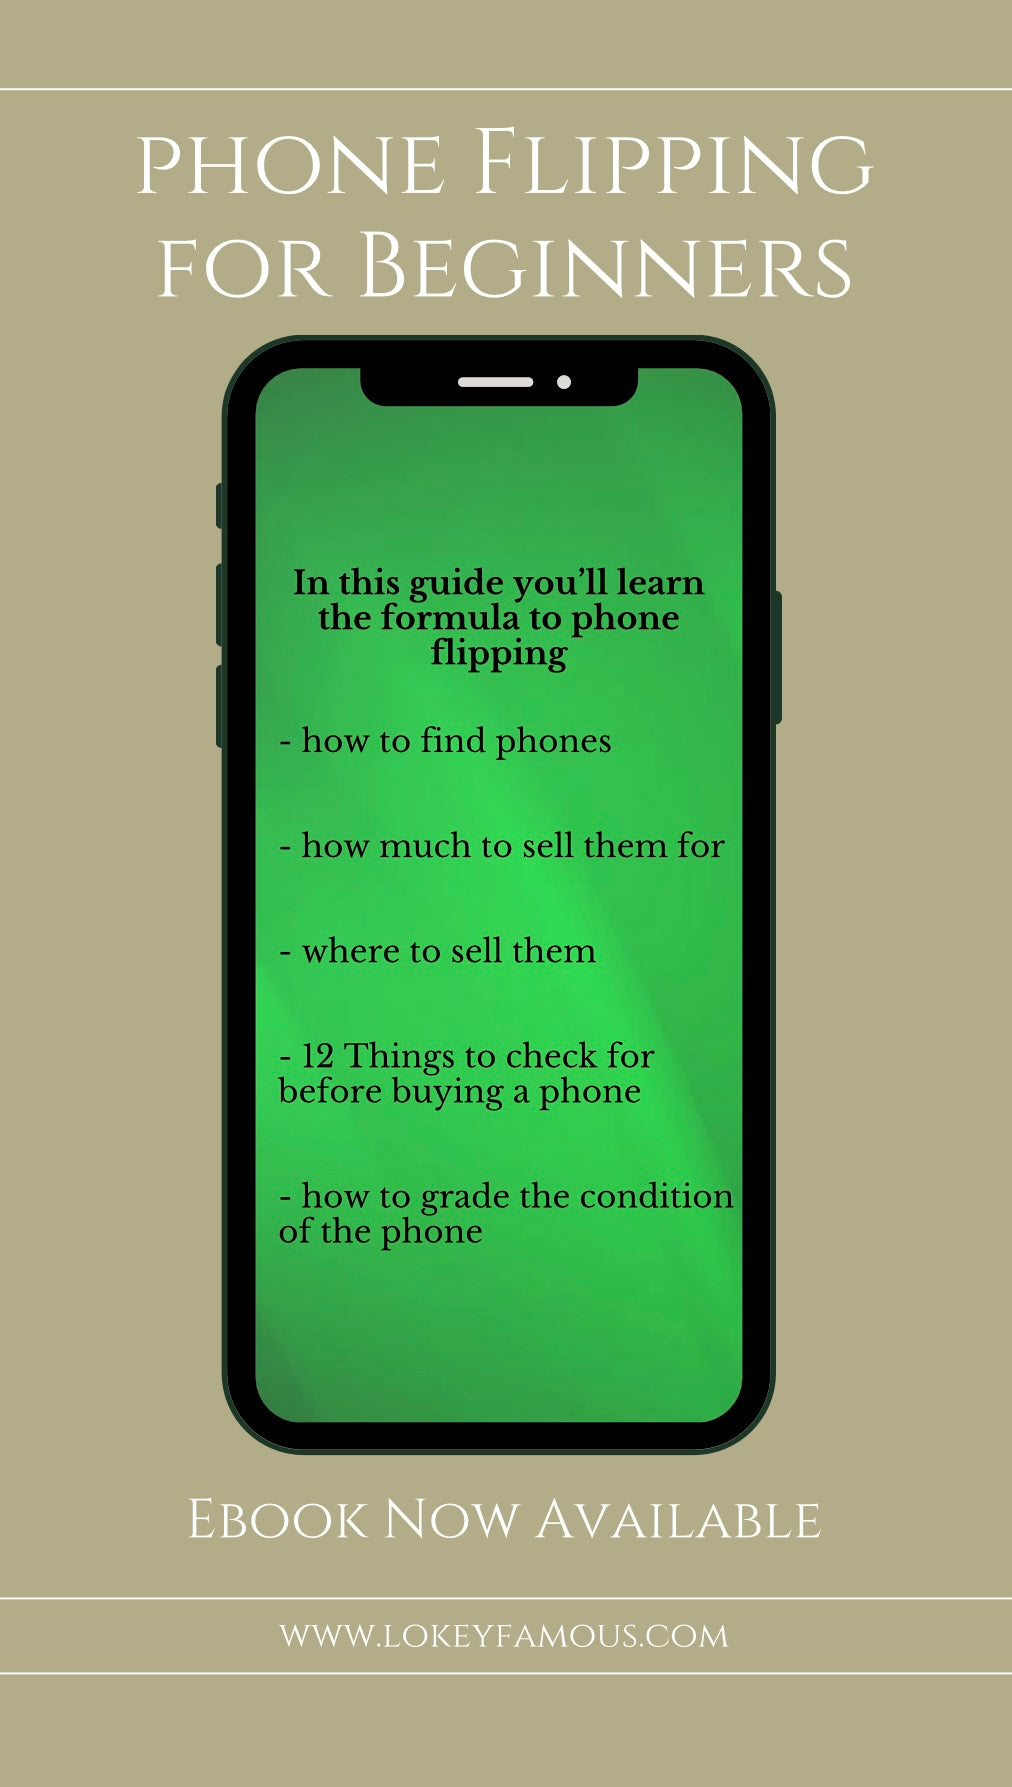 Phone Flipping For Beginners